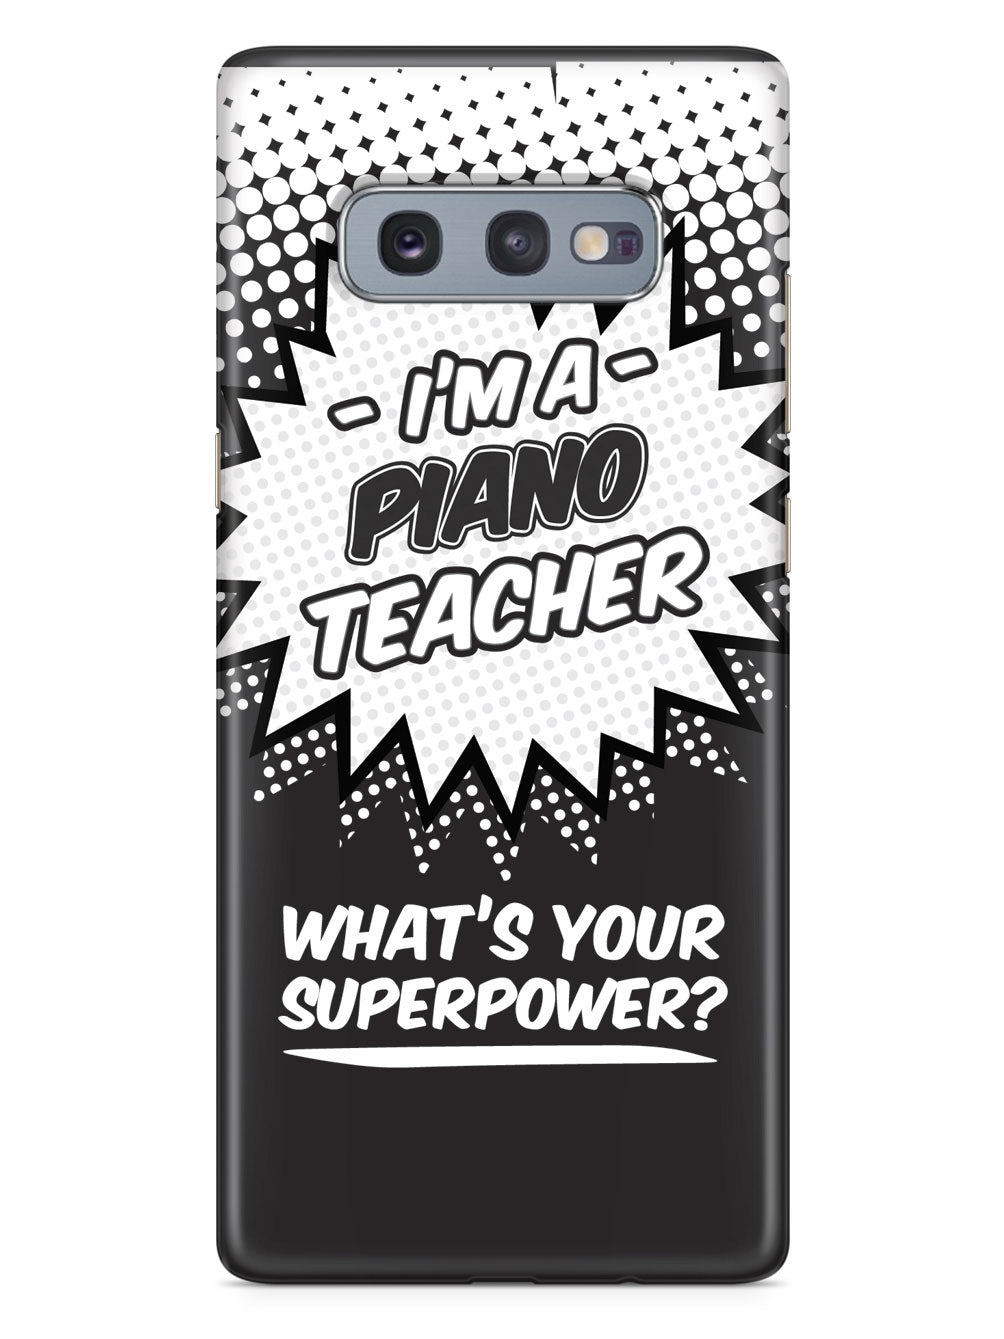 Piano Teacher - What's Your Superpower? Case